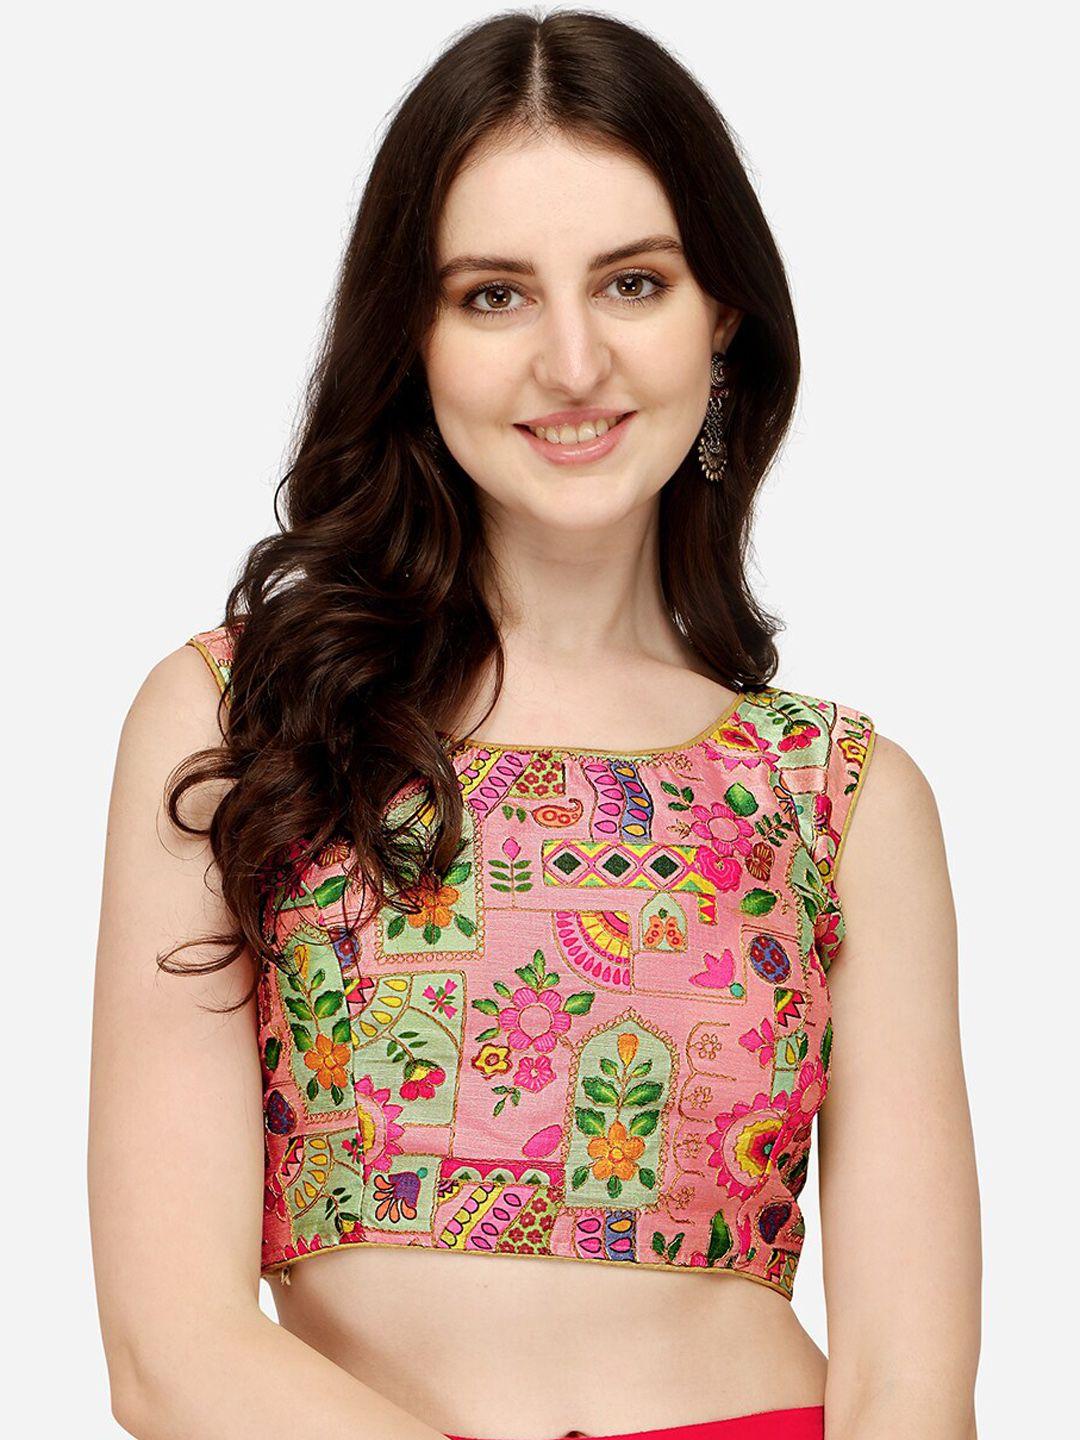 pujia-mills-women-pink-&-green-digital-printed-embroidered-saree-blouse